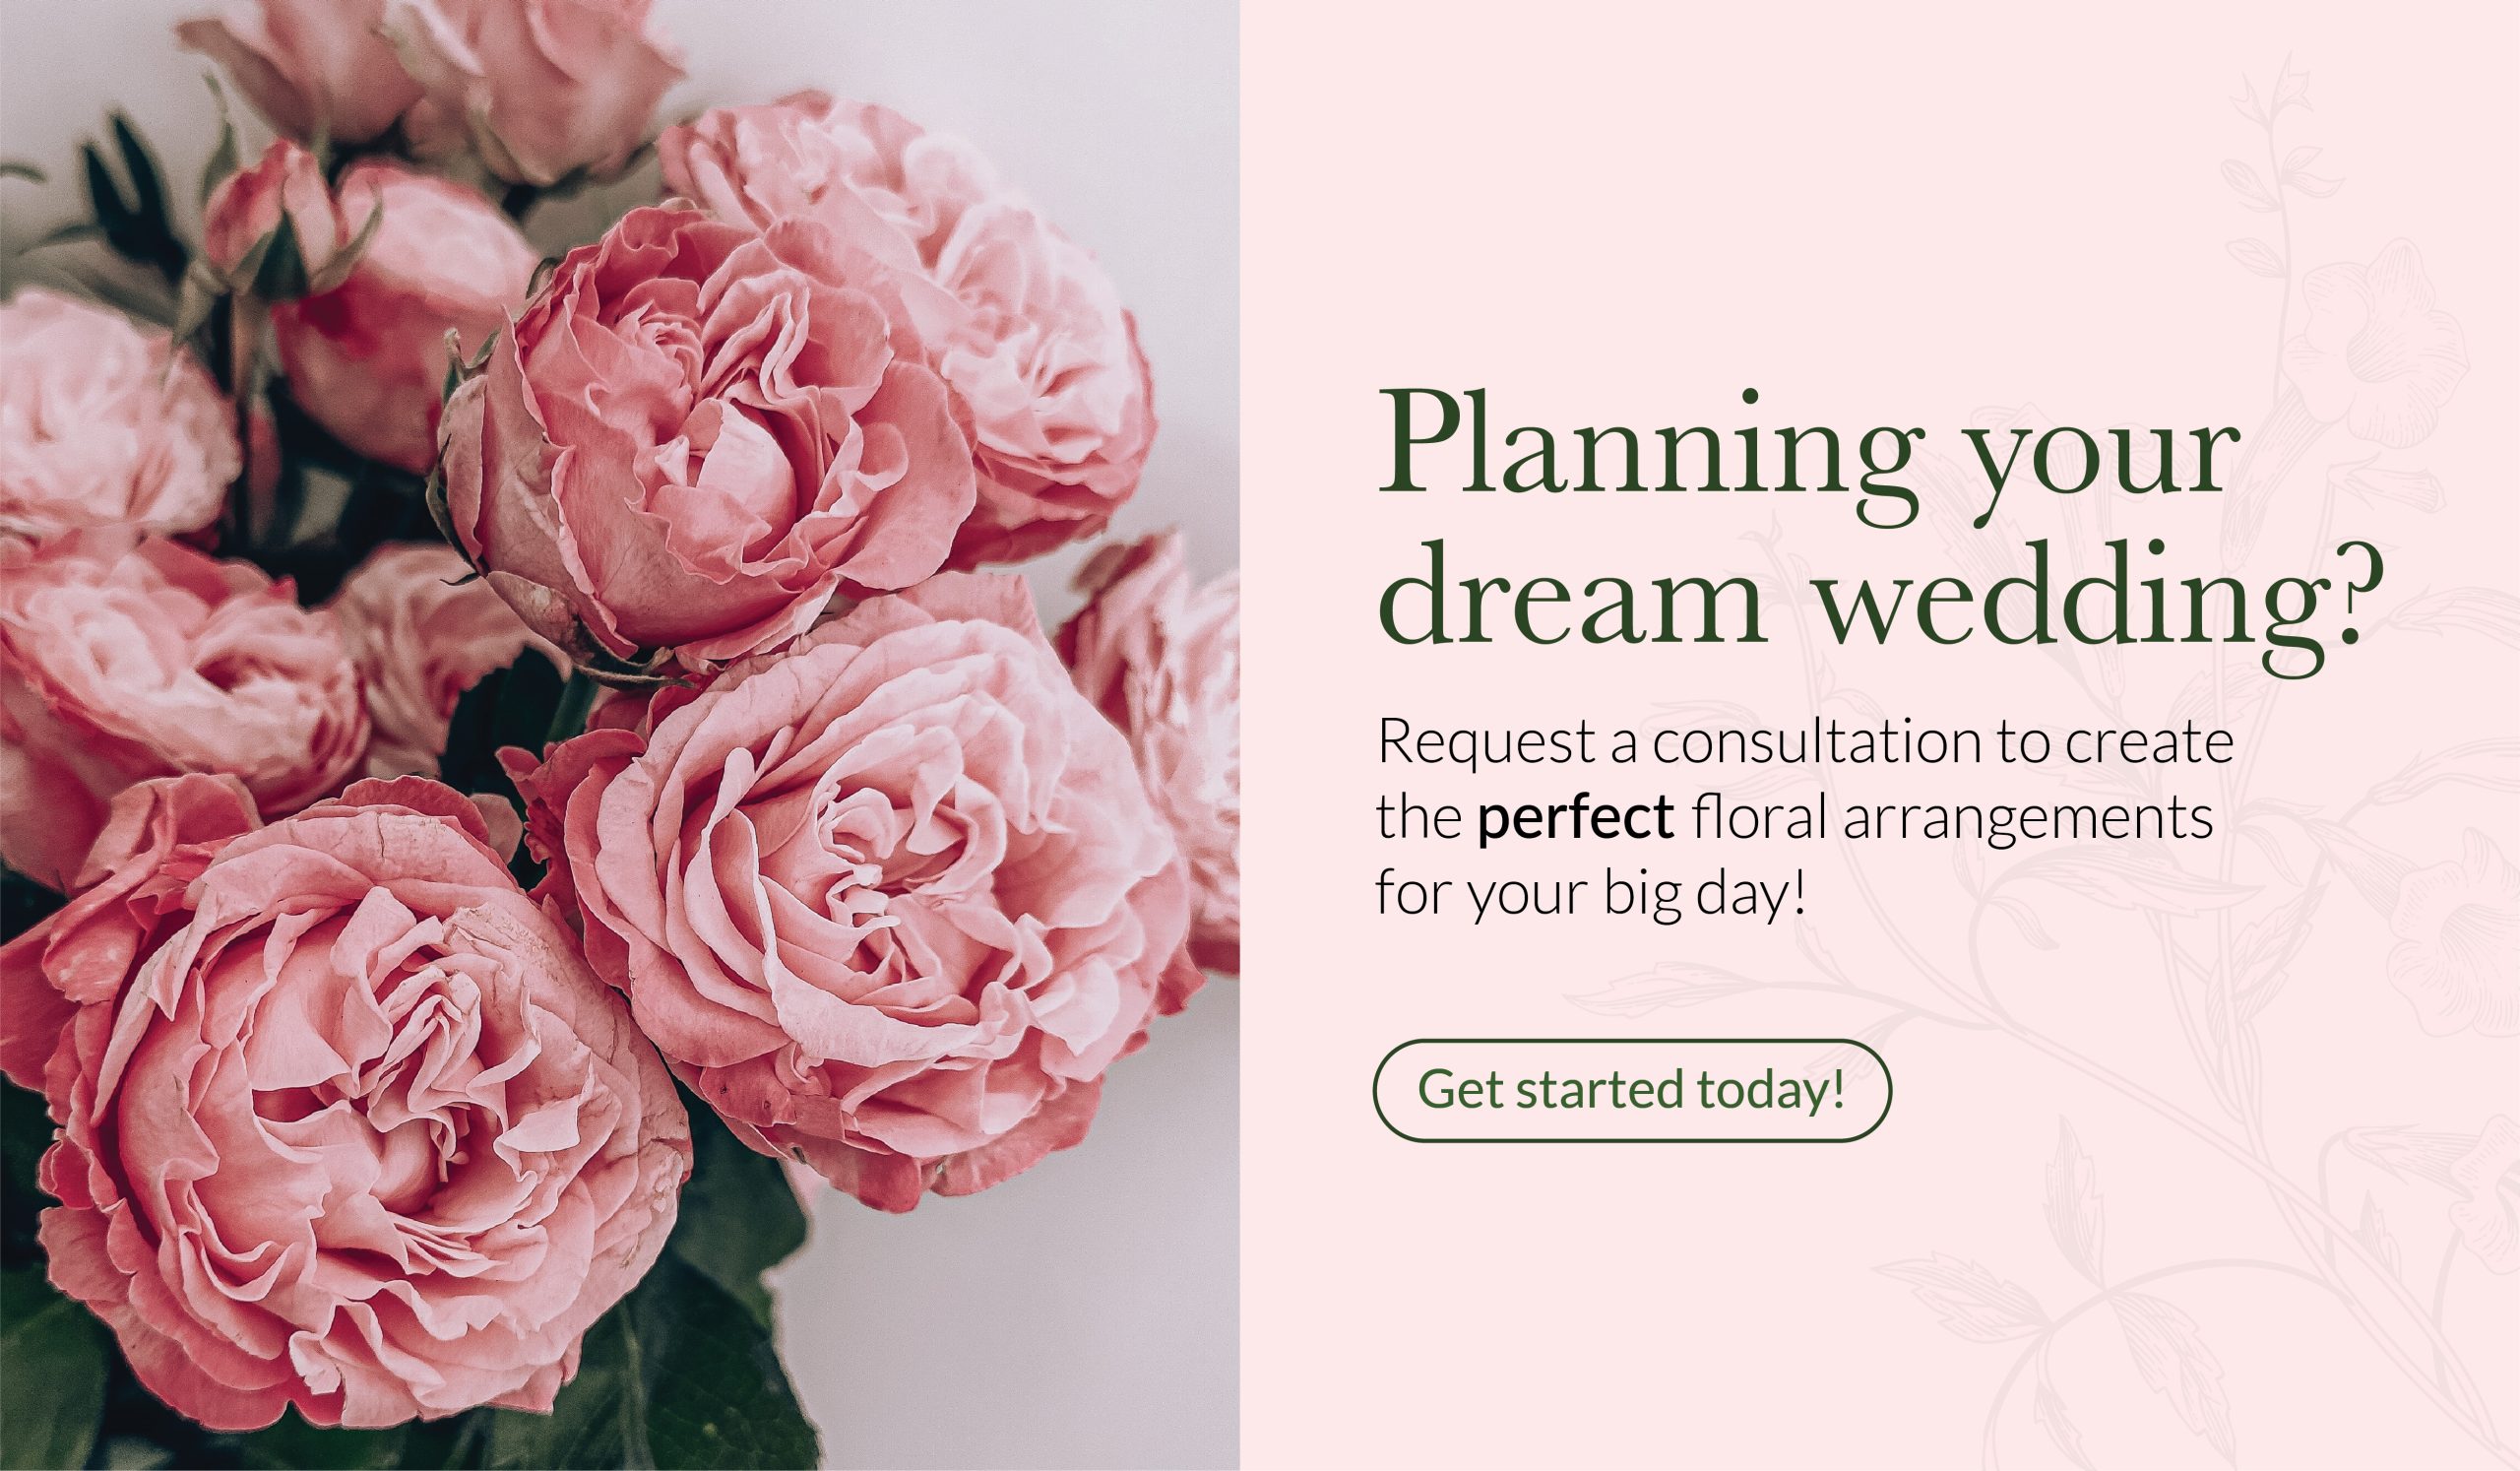 Planning your dream wedding? Request a consultation to create the perfect floral arrangements for your big day!